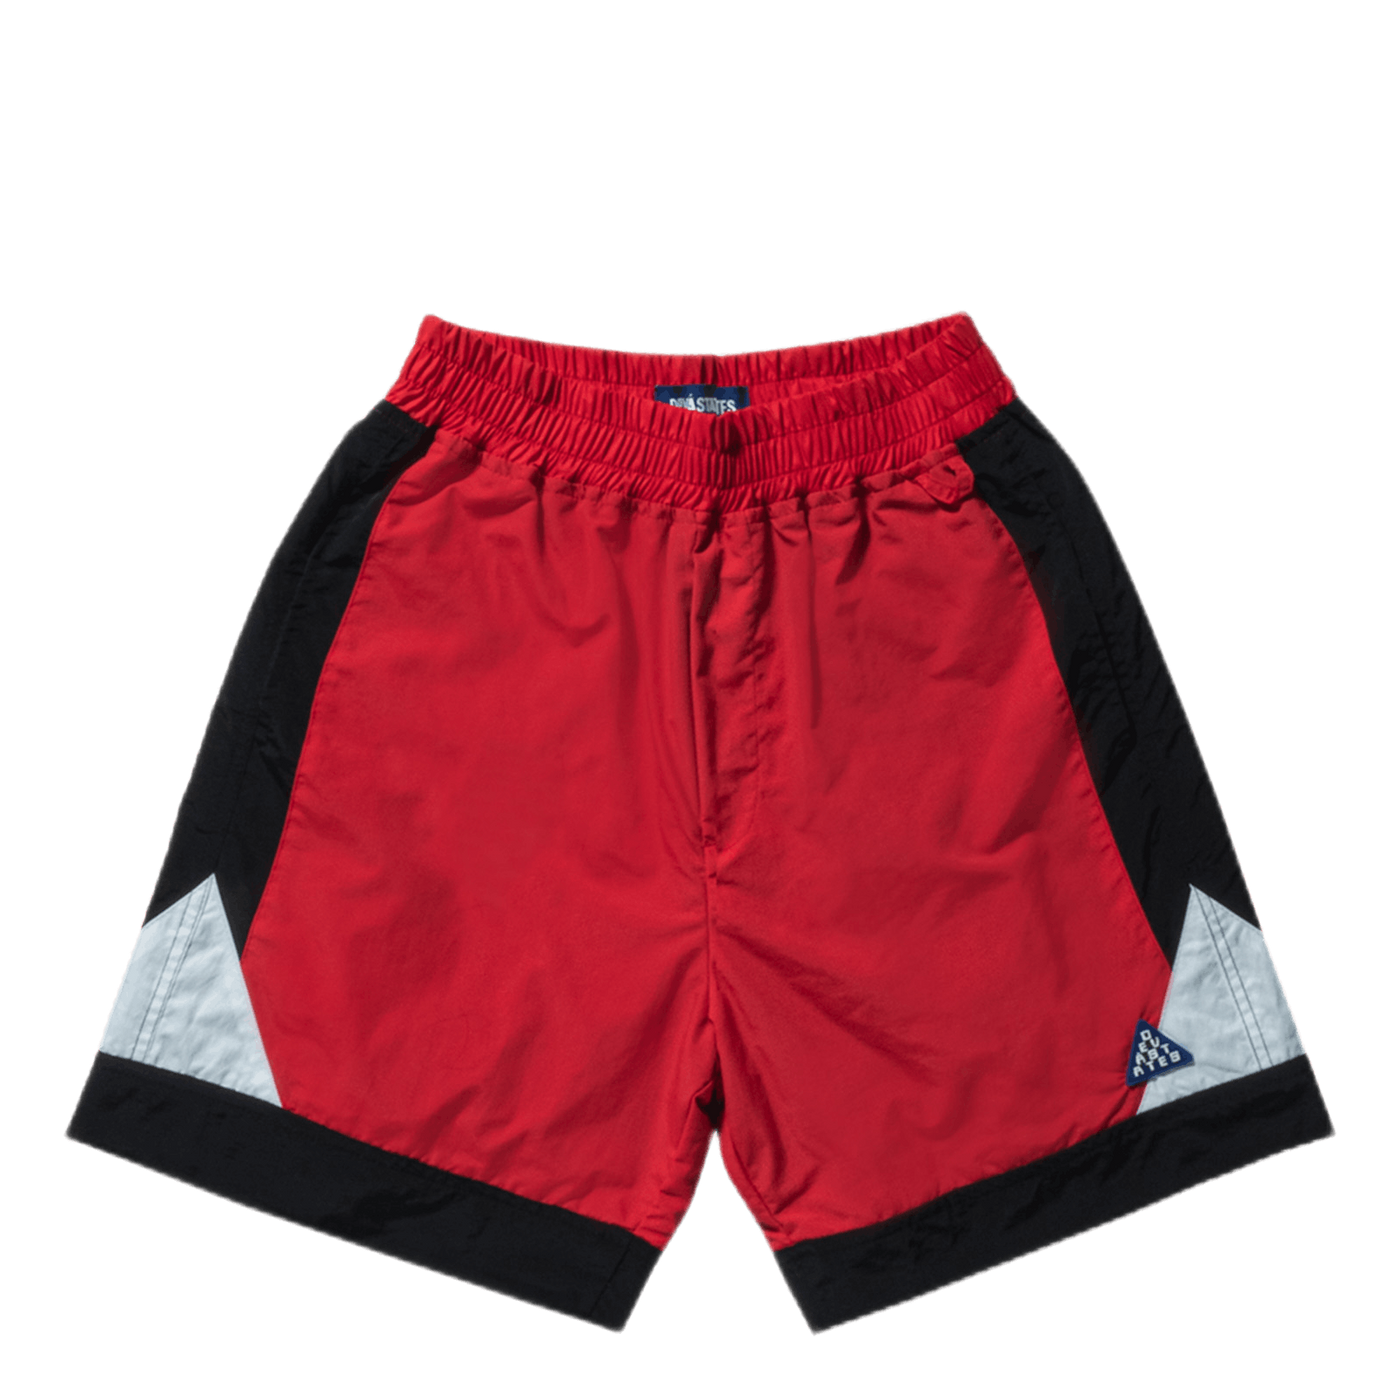 Team Shorts Red